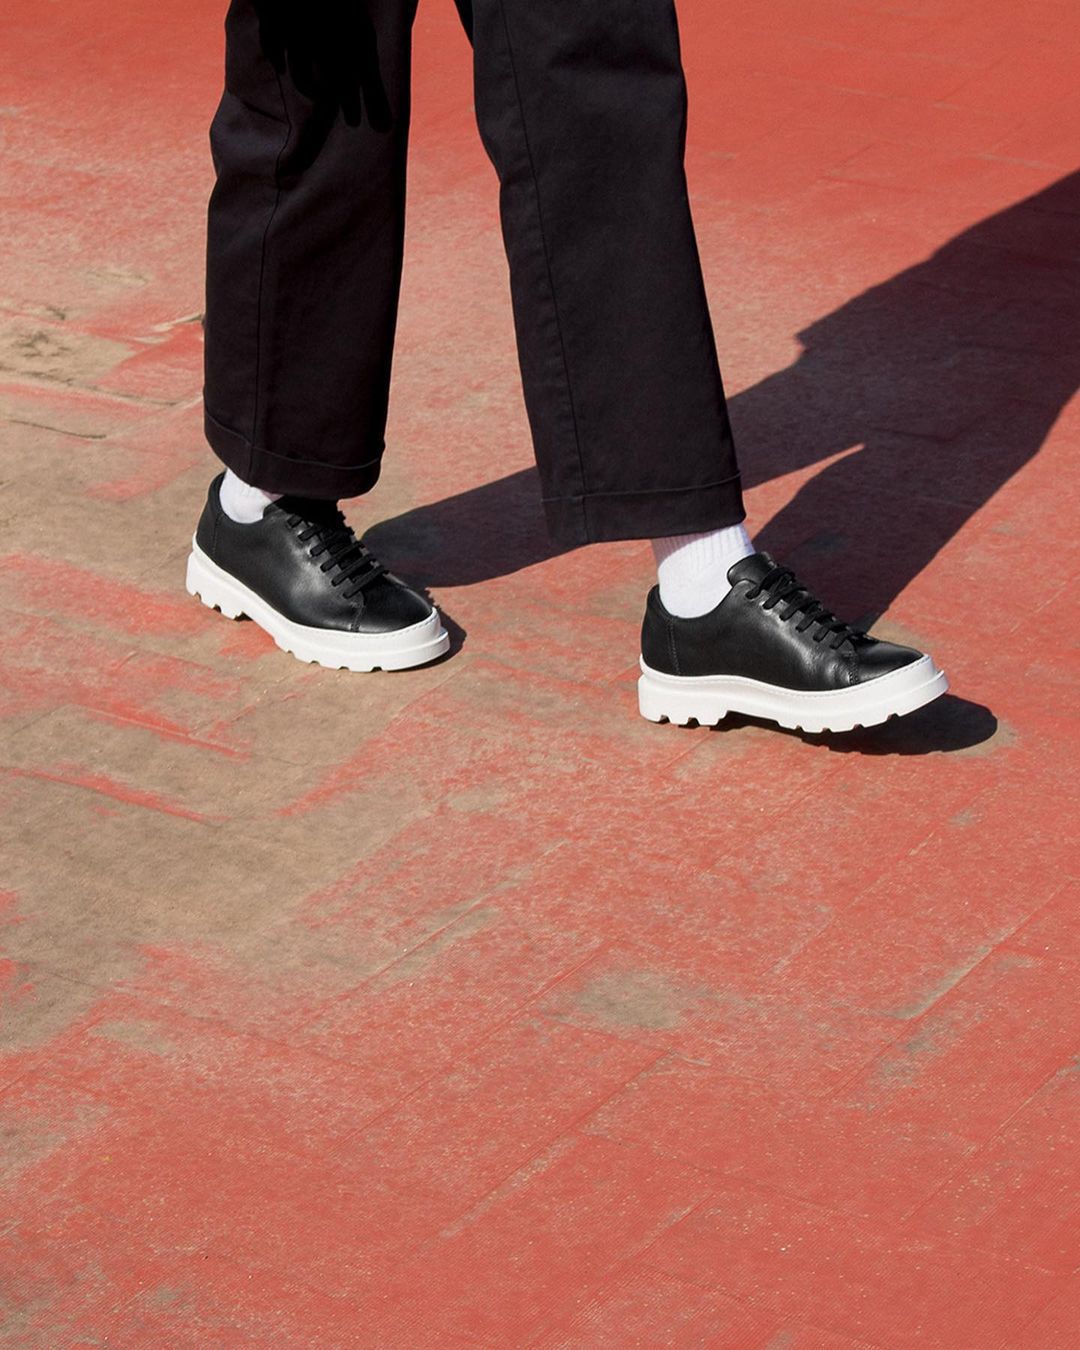 Camper - A Camper original since 1986 with an iconic urban design. Brutus is durable thanks to 360° stitching and features XL ExtraLight technology. Quality leathers give this shoe a cutting-edge look...